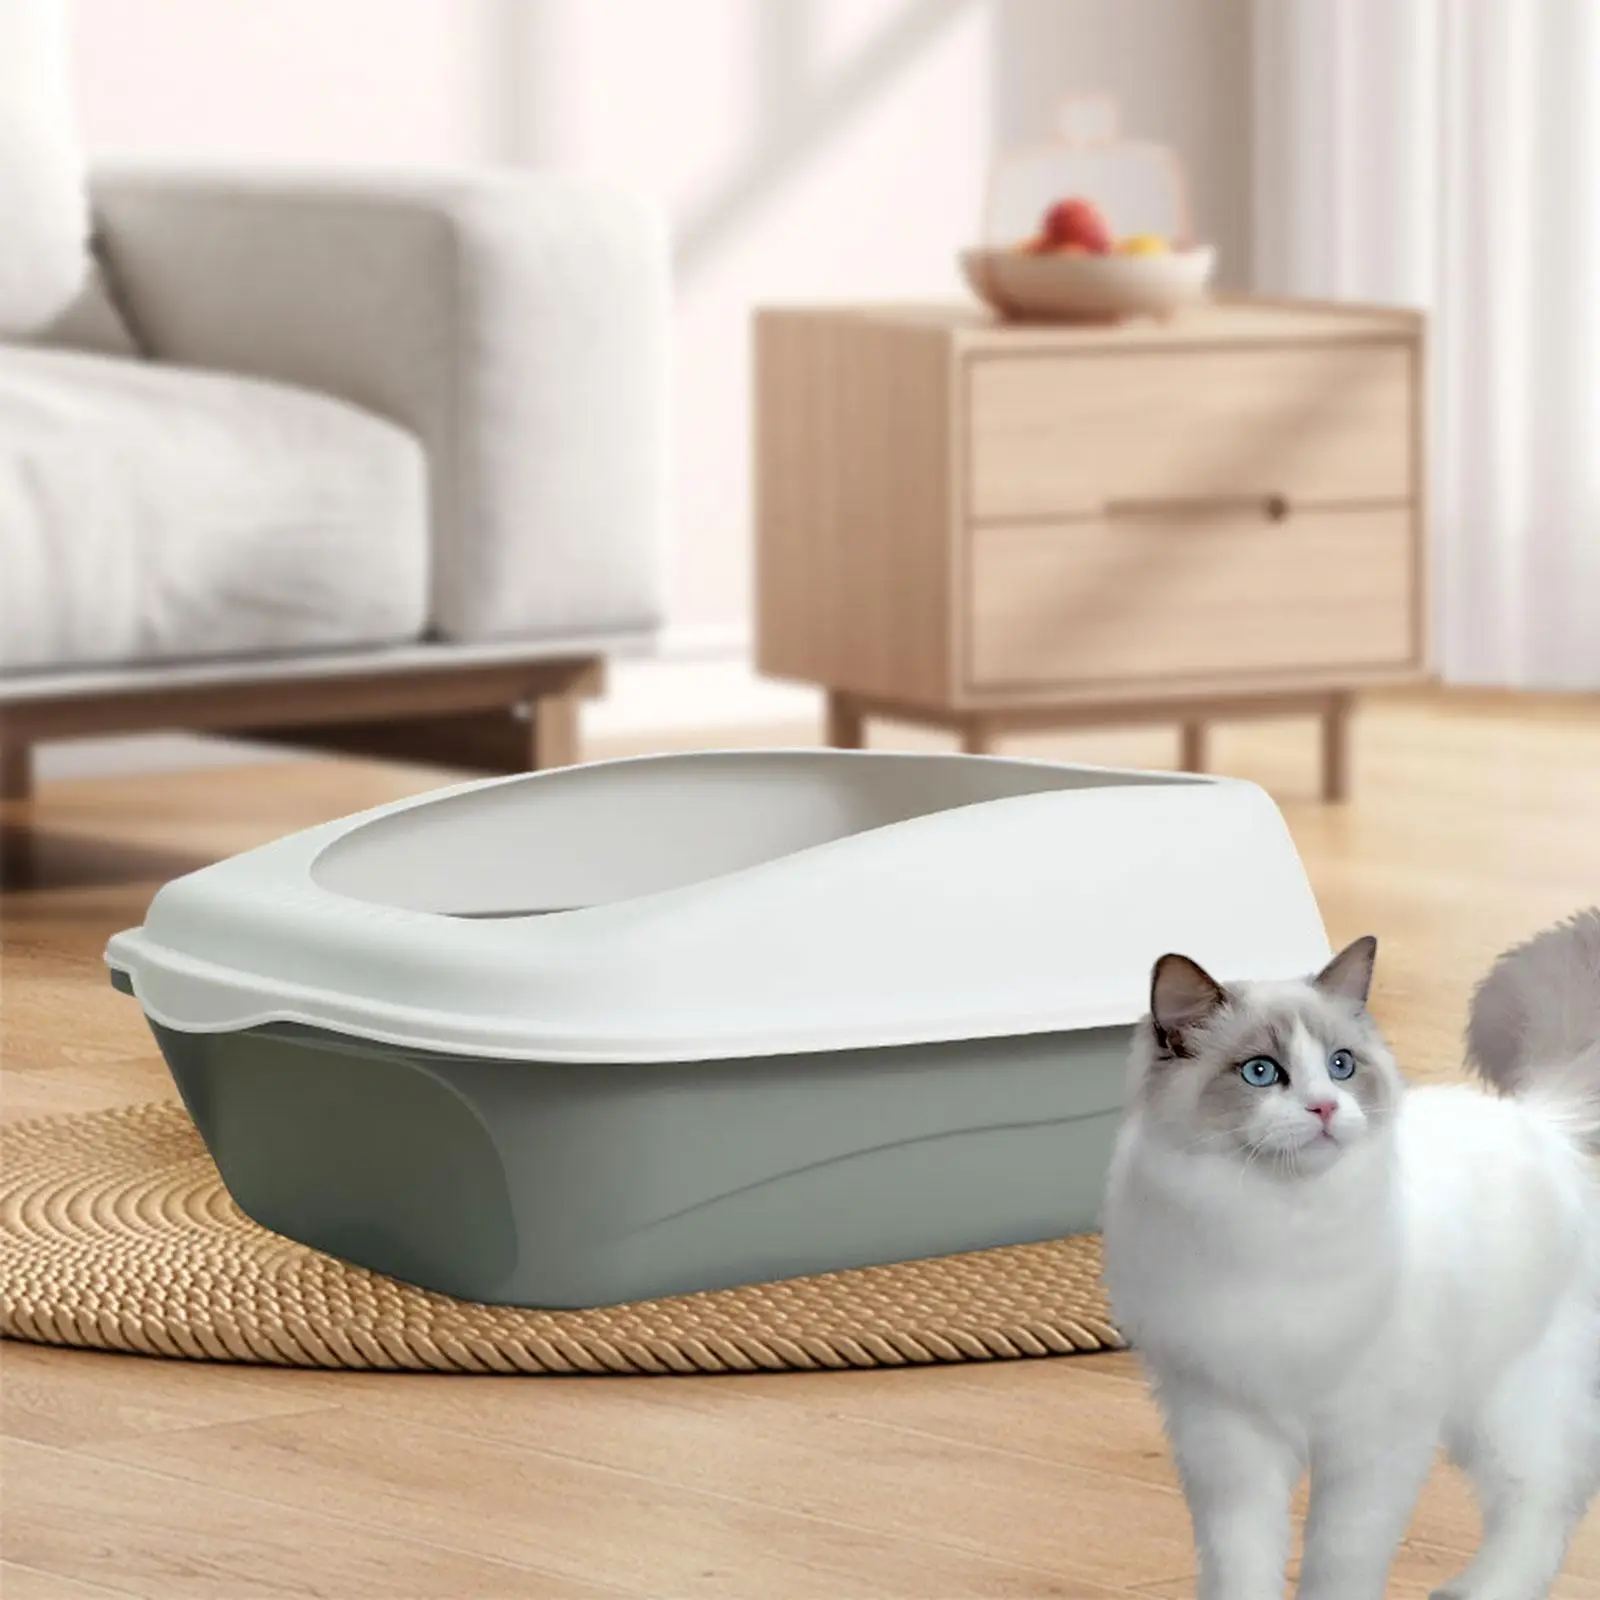 Pet Litter Pan with Scooper Large Pan Detachable Litter Pans for Rabbit Small and Medium Cats Indoor Cats Small Animals Hamsters